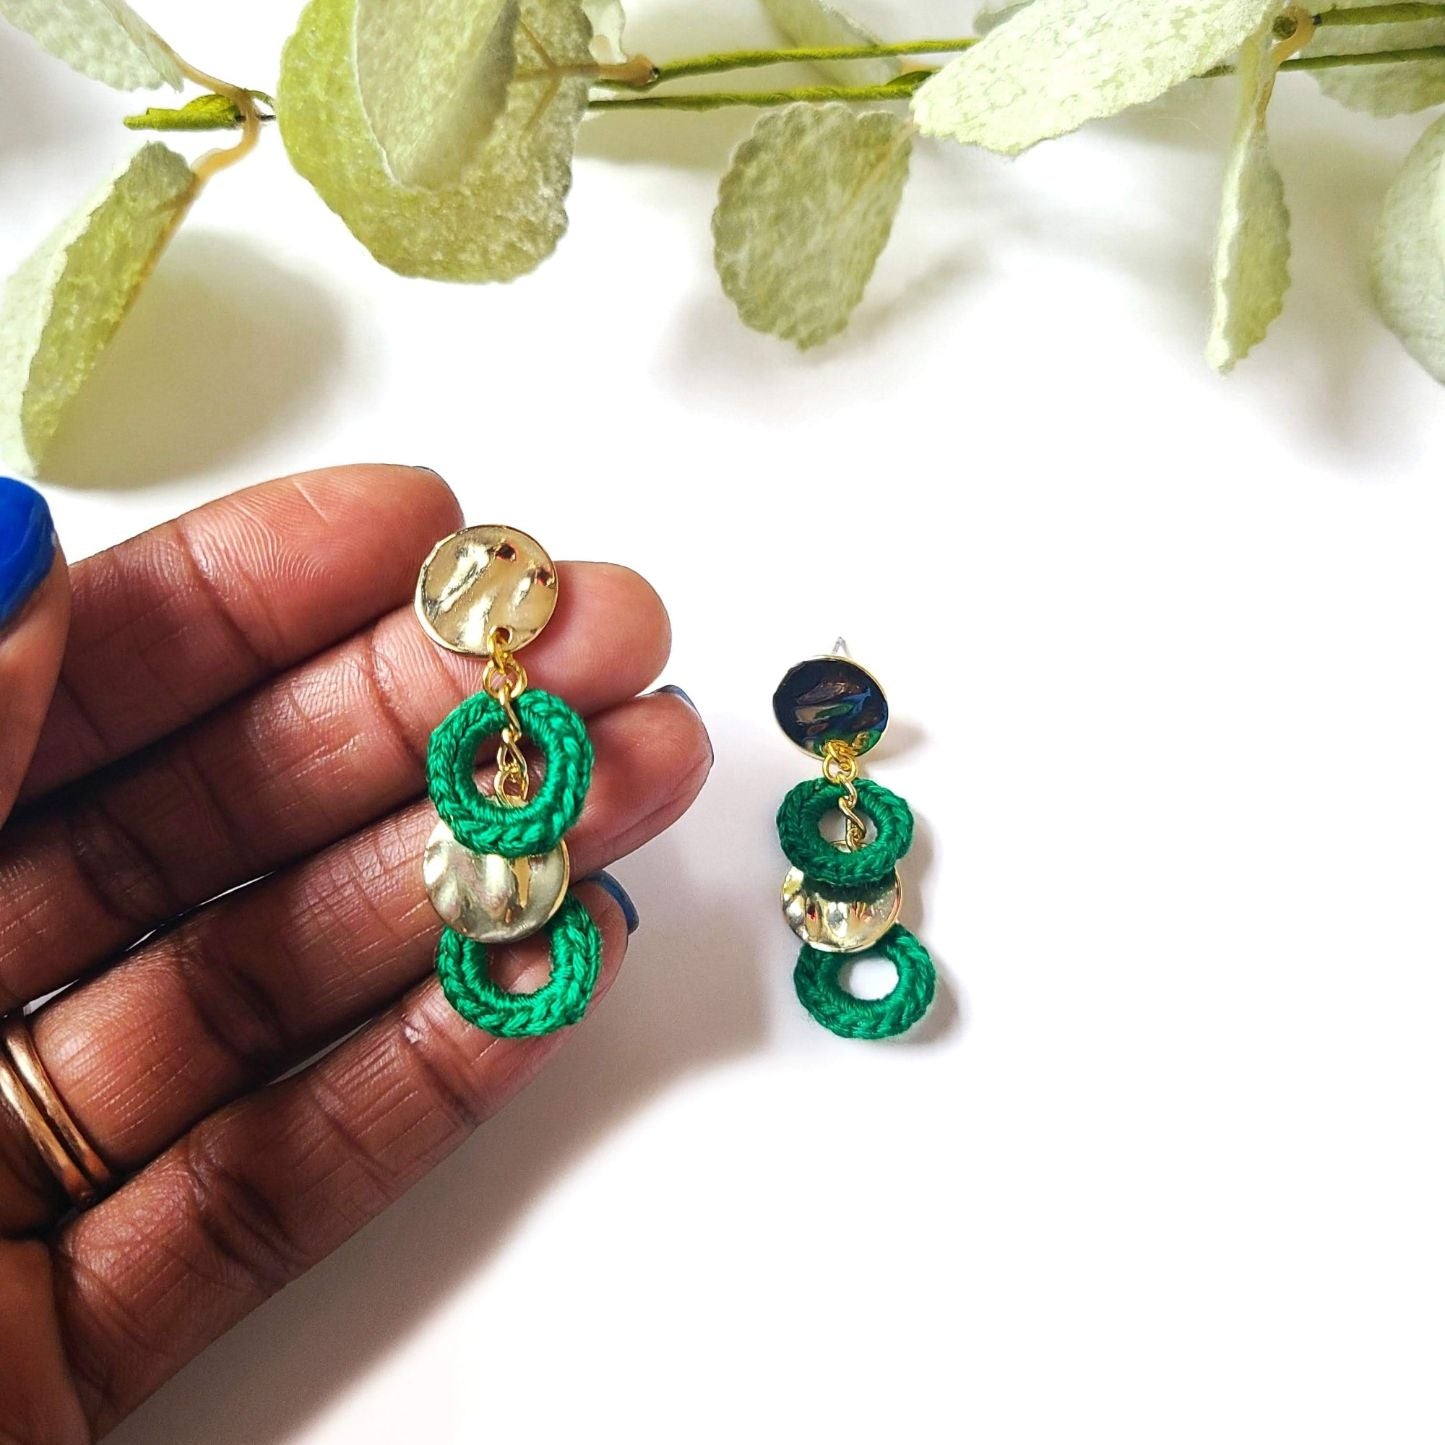 A model holding a pair of gold and green circle earrings.